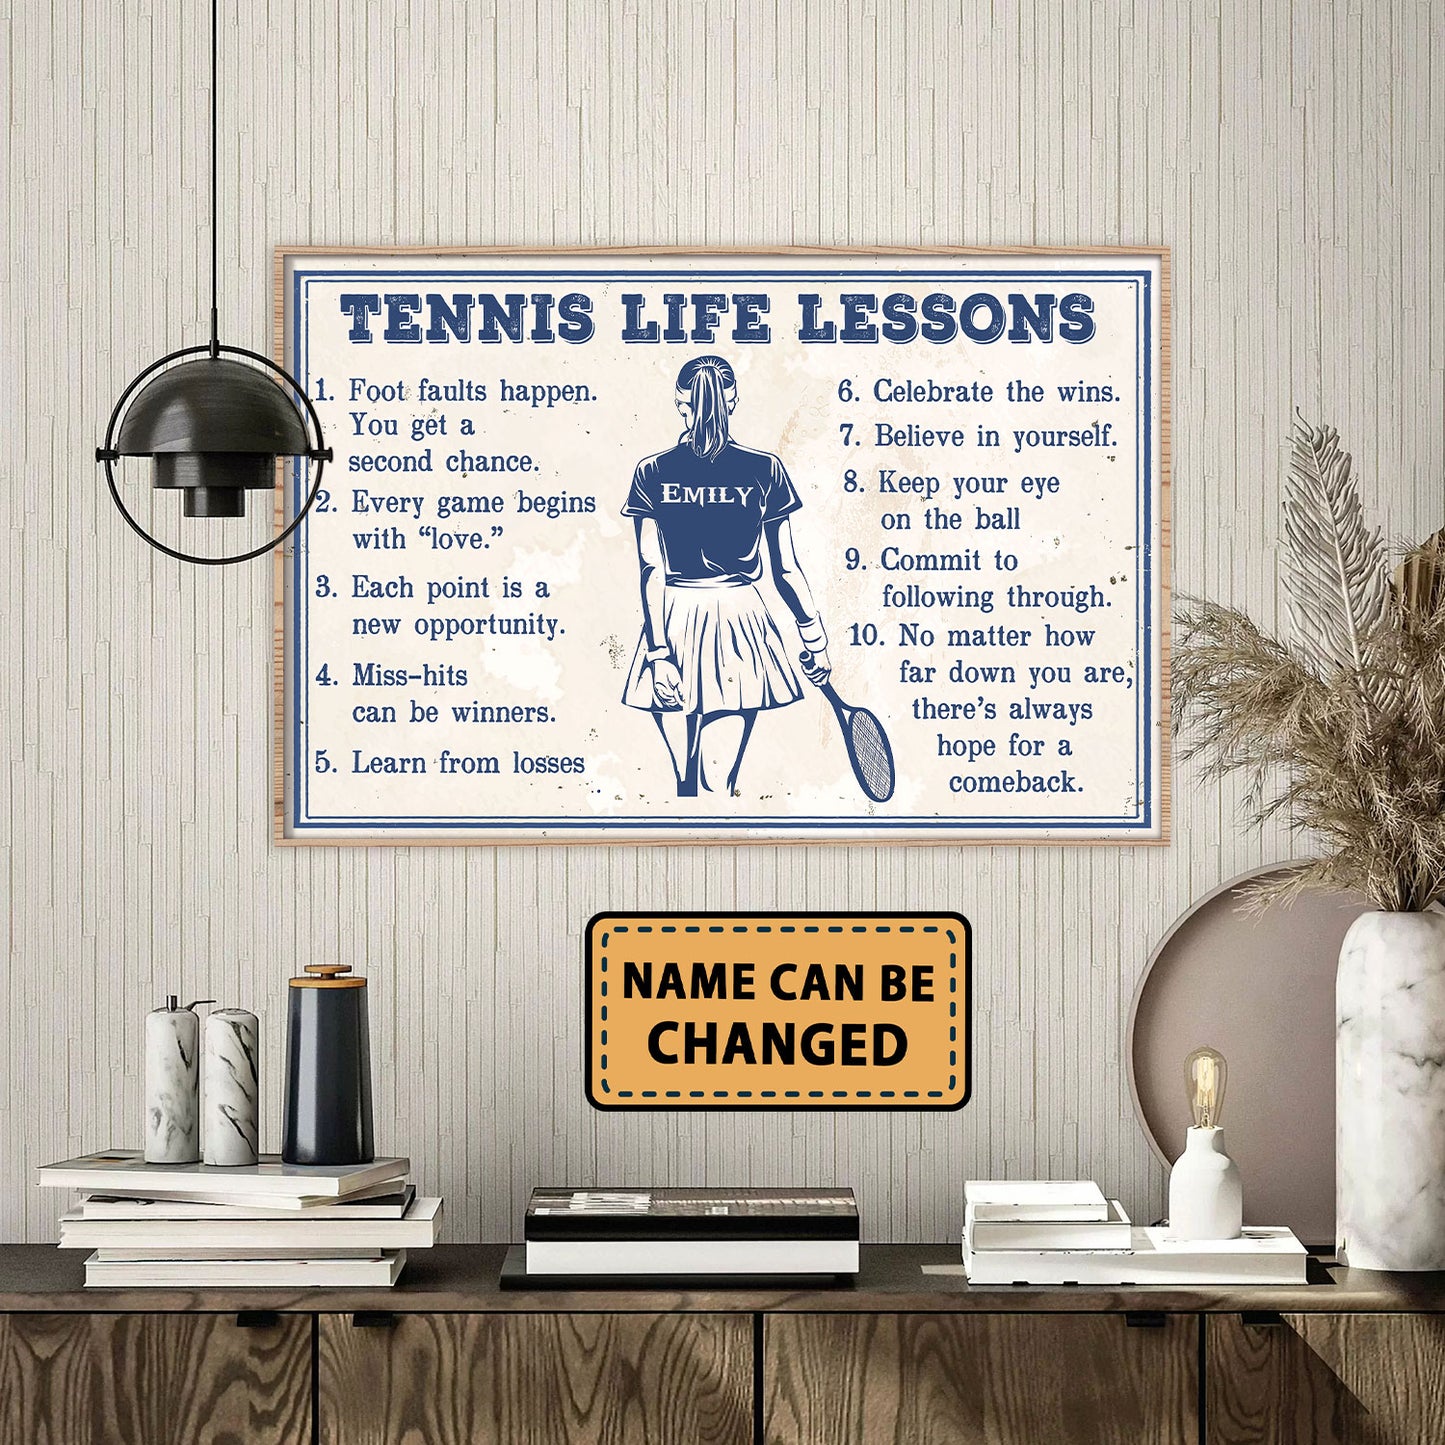 Tennis Life Lessons - Personalizedwitch Horizontal Poster  For Tennis Player